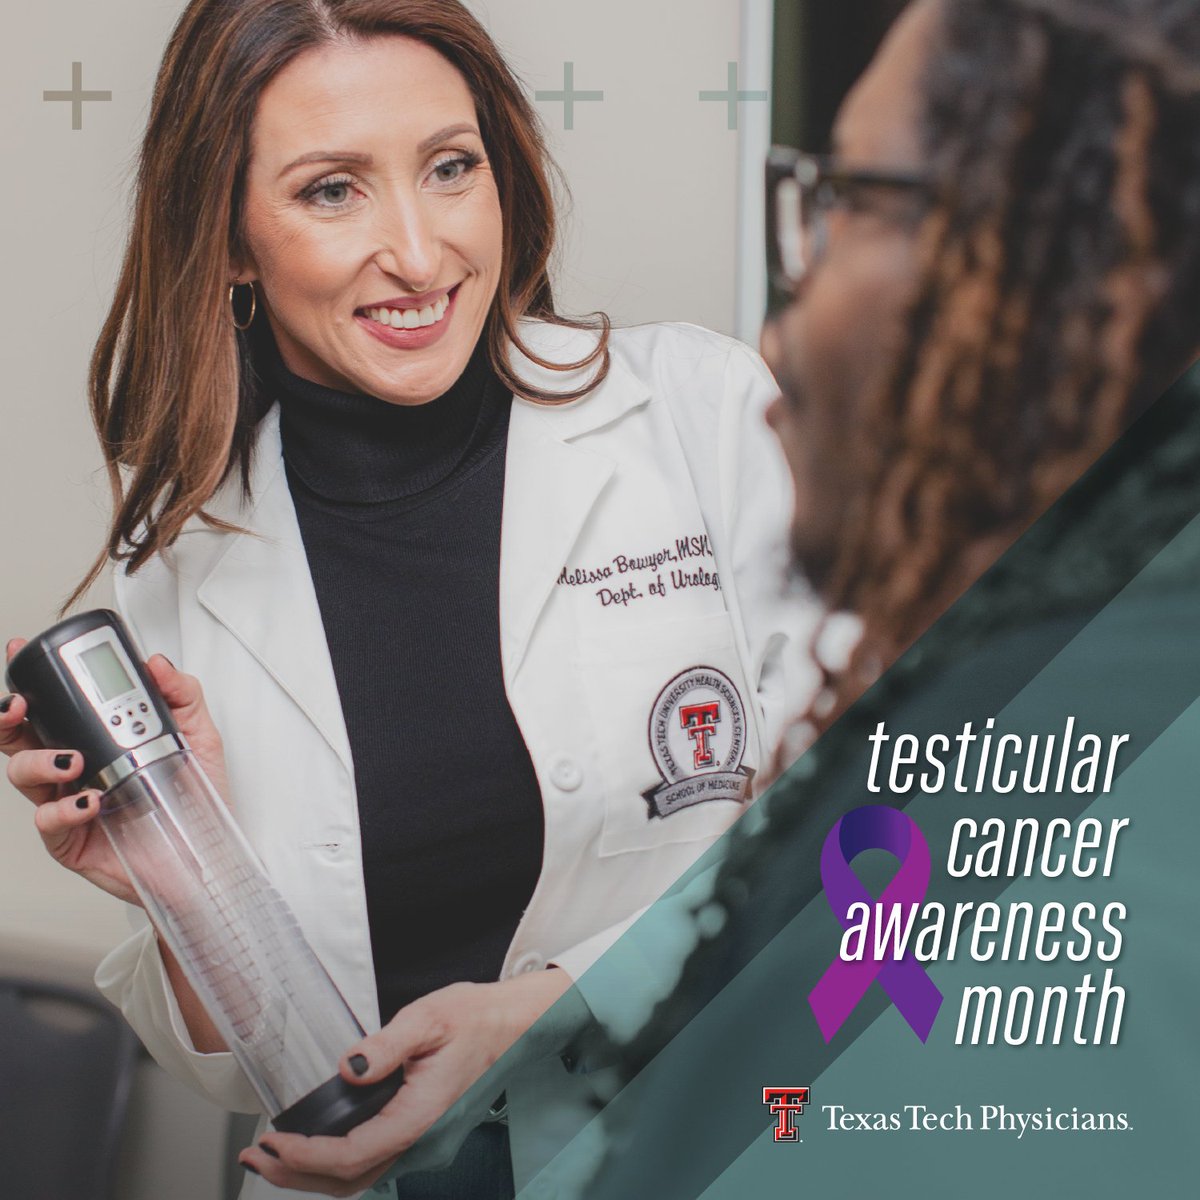 April is 𝘛𝘦𝘴𝘵𝘪𝘤𝘶𝘭𝘢𝘳 𝘊𝘢𝘯𝘤𝘦𝘳 𝘈𝘸𝘢𝘳𝘦𝘯𝘦𝘴𝘴 𝘔𝘰𝘯𝘵𝘩. The Texas Tech Physicians #Urology clinic treats urological cancers and men’s sexual health. A lump or bump on the testicle is a warning sign and needs further evaluation by a doctor.